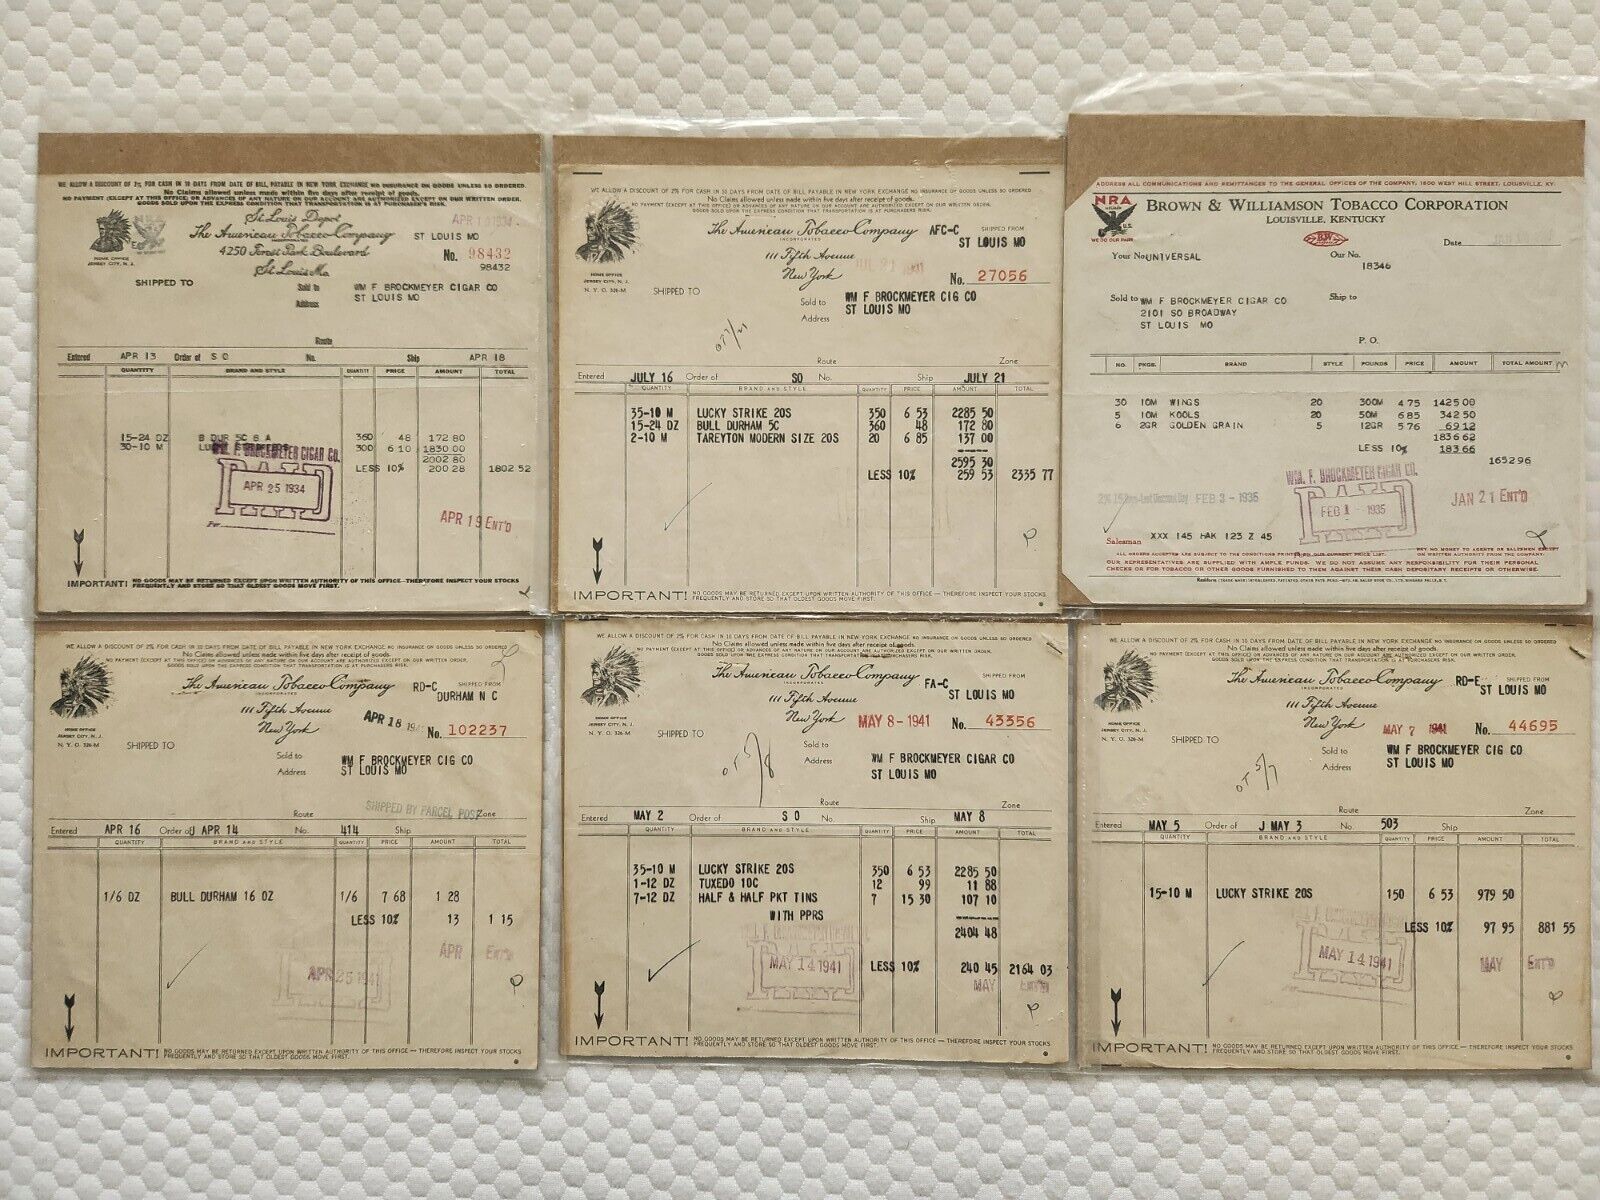 LOT OF AMERICAN TOBACCO COMPANY SALES RECEIPTS 1930'S & 40'S